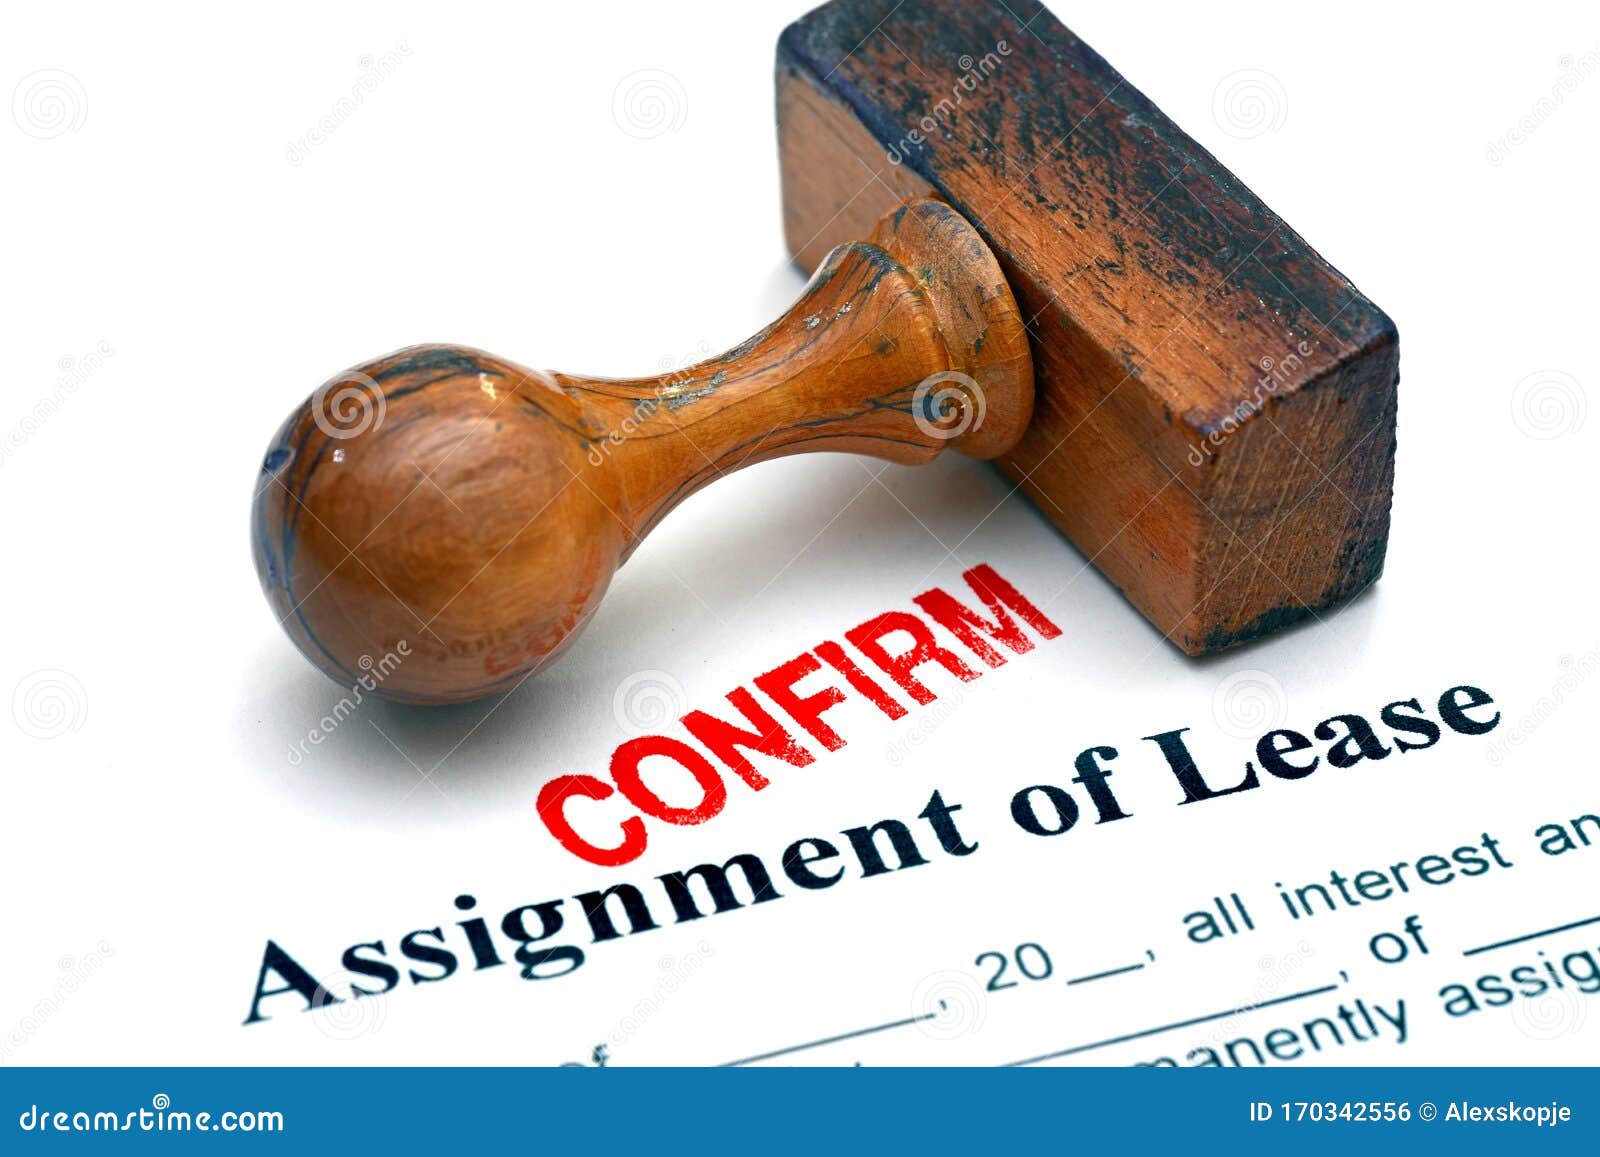 lease assignment meaning